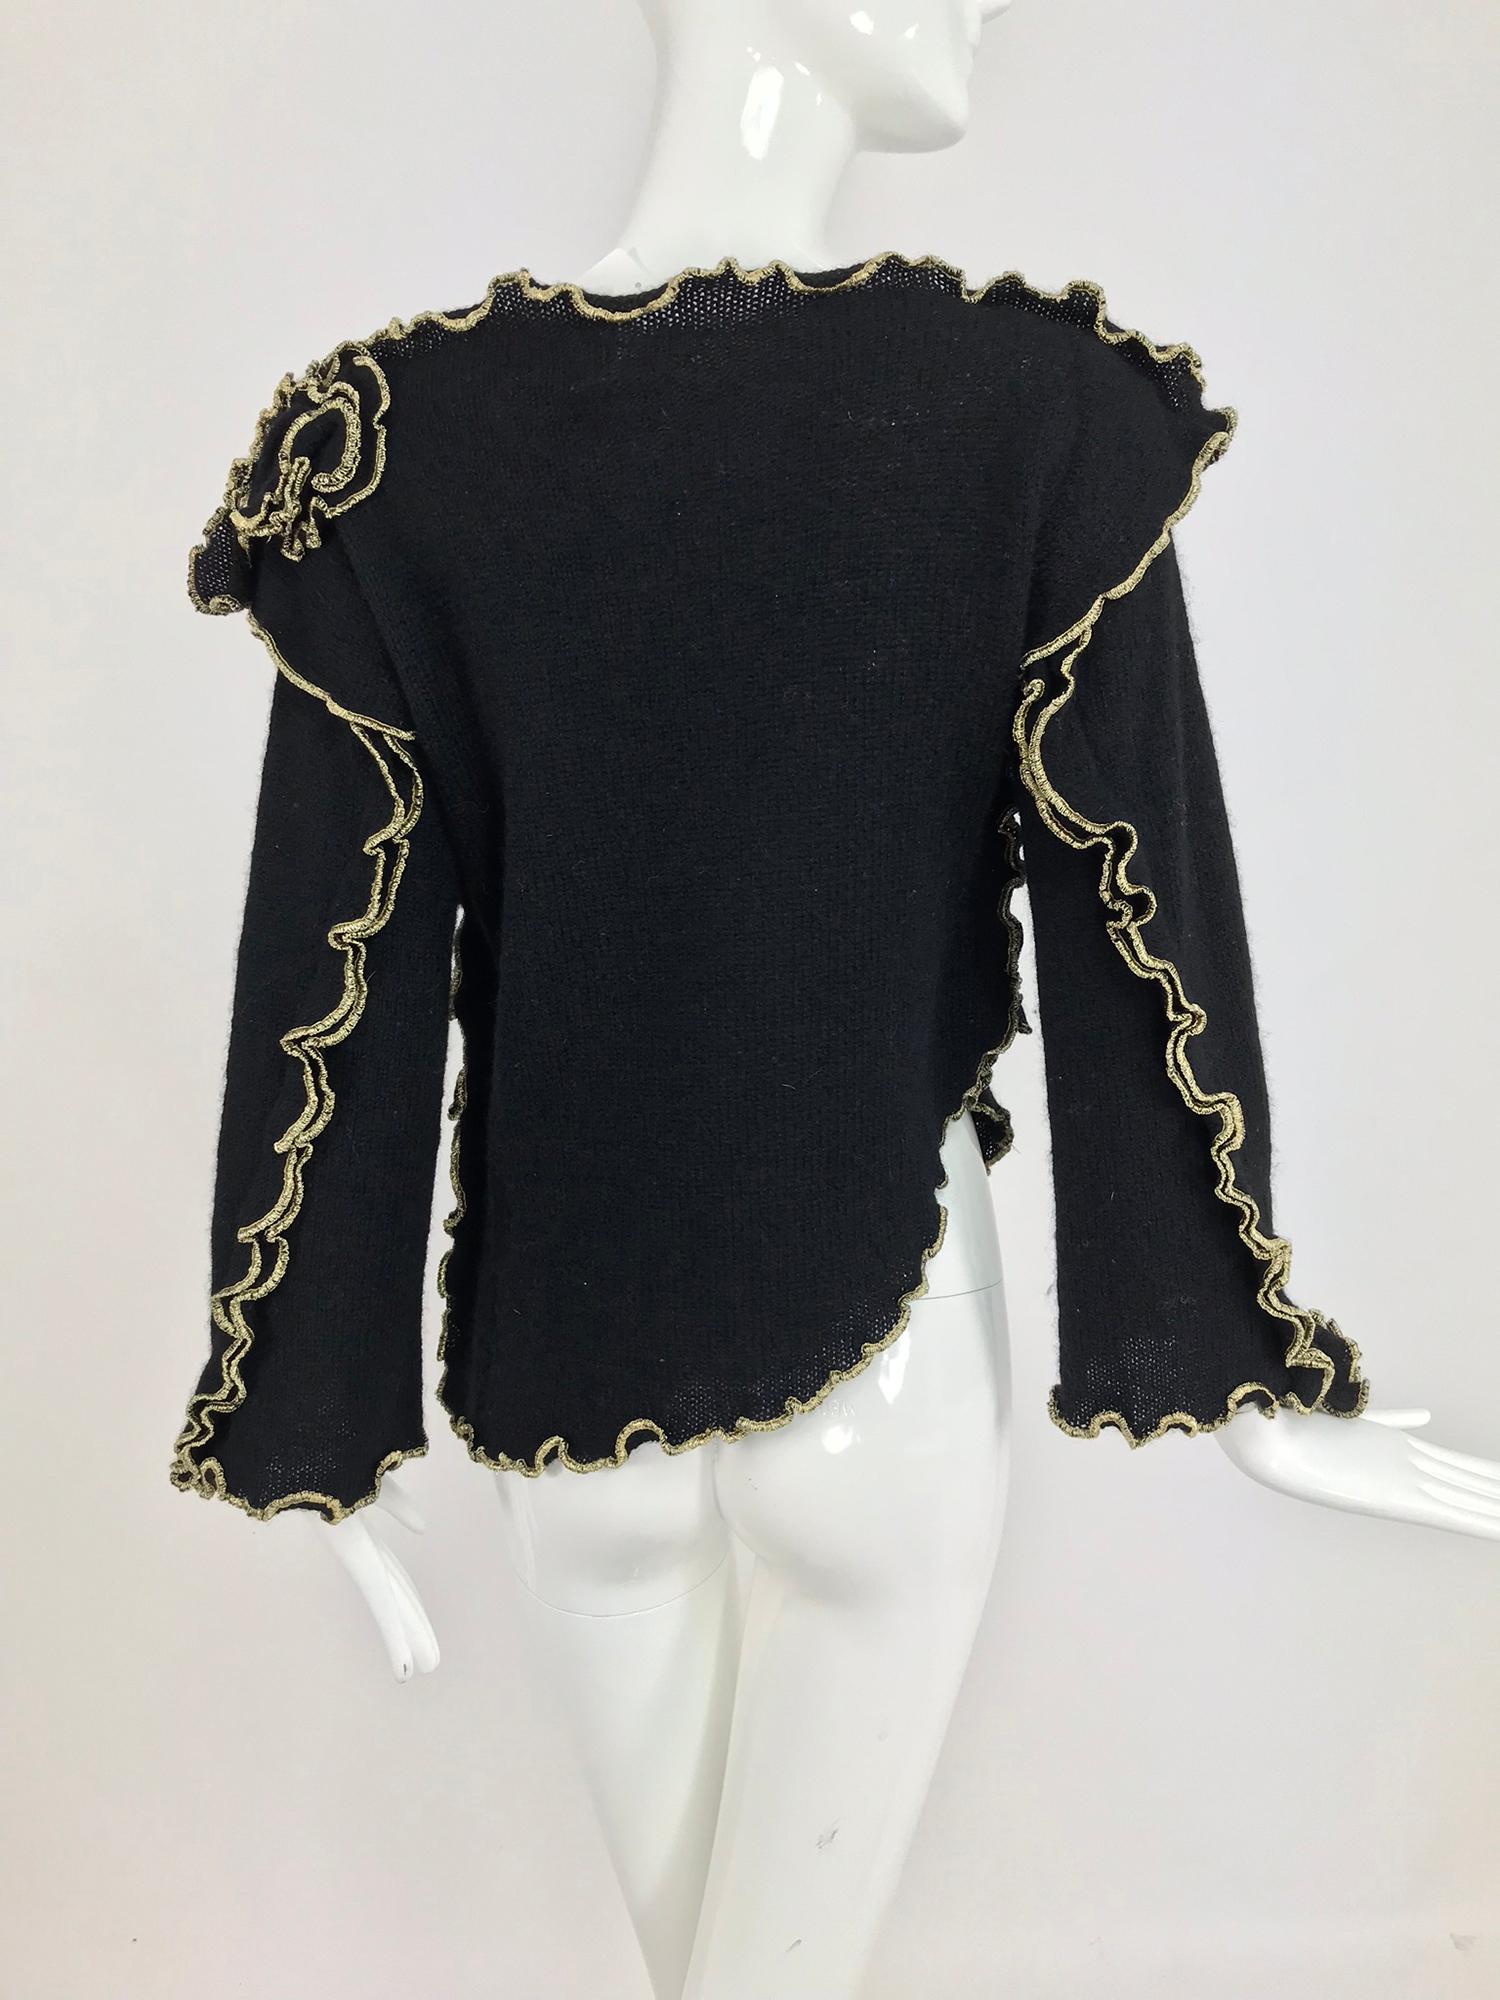 Leigh Westbrook Black Knit Gold Trim Floral Applique Sweater 1980s 6